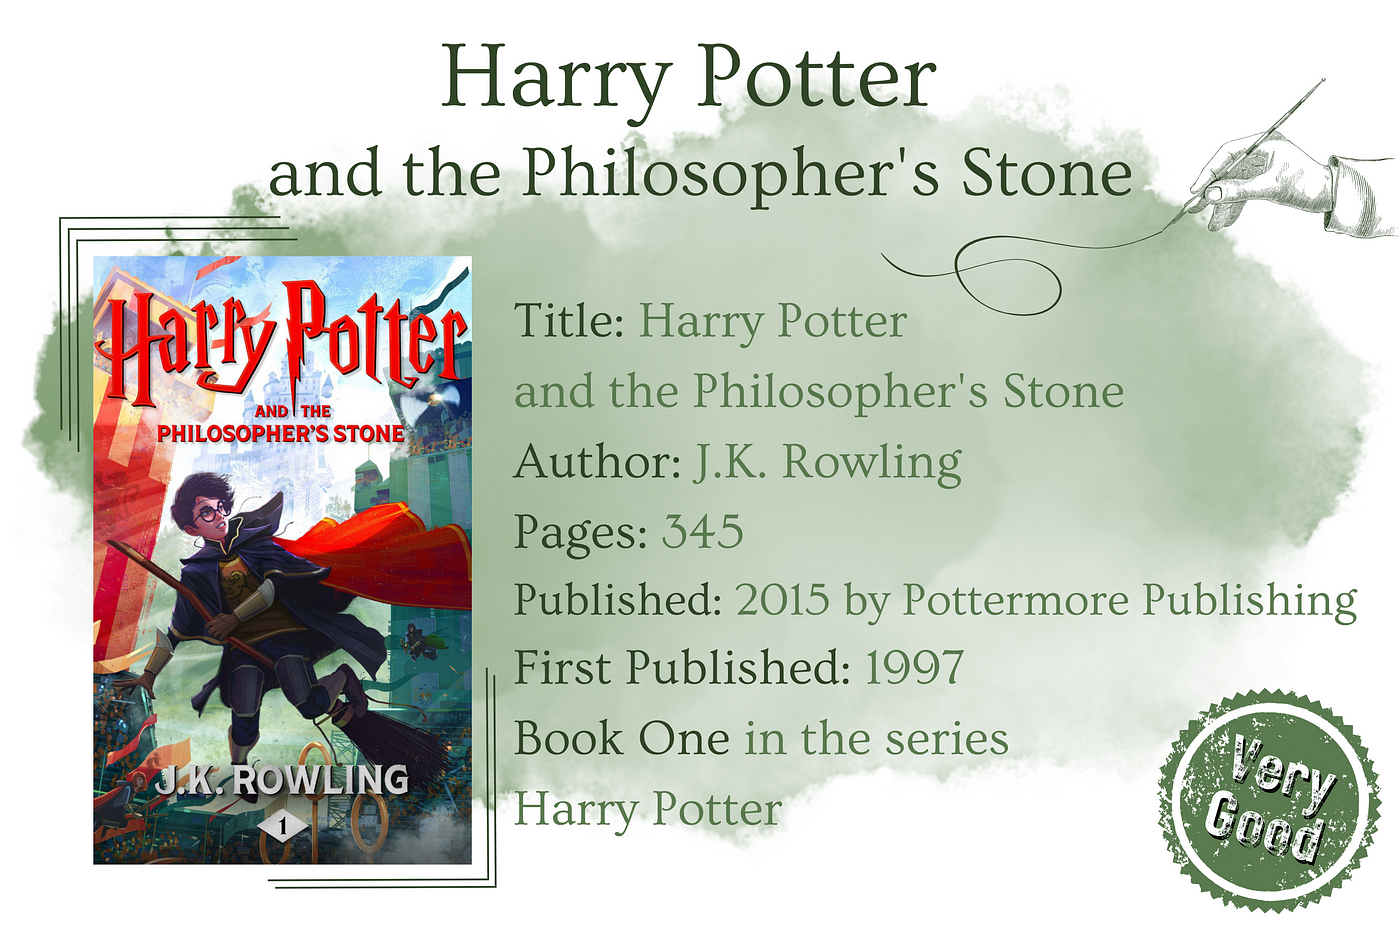 Harry Potter and the Philosopher's Stone [Book]